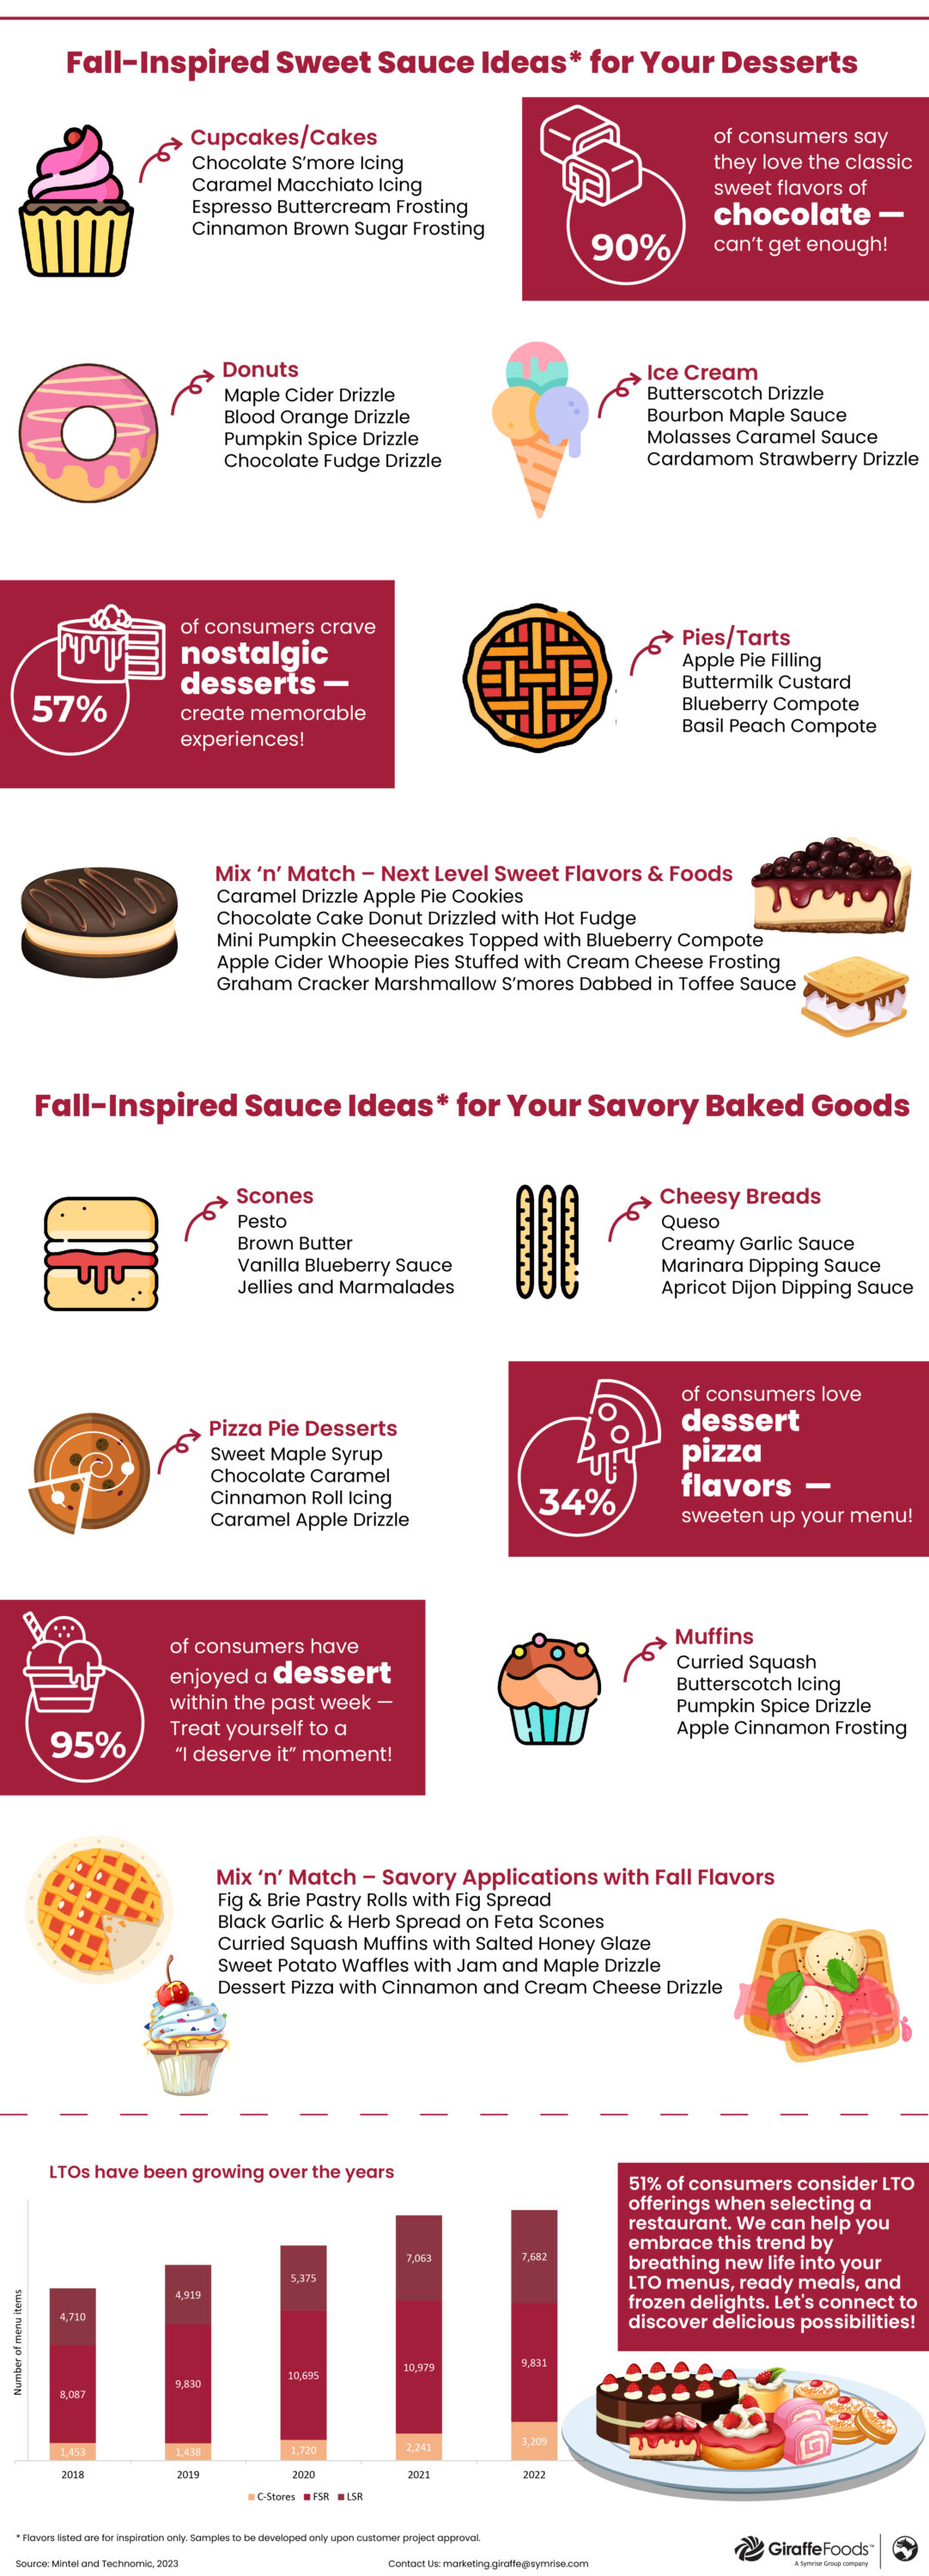 Fall-Inspired-Sweet-Savory-Desserts-Infographic-Insights